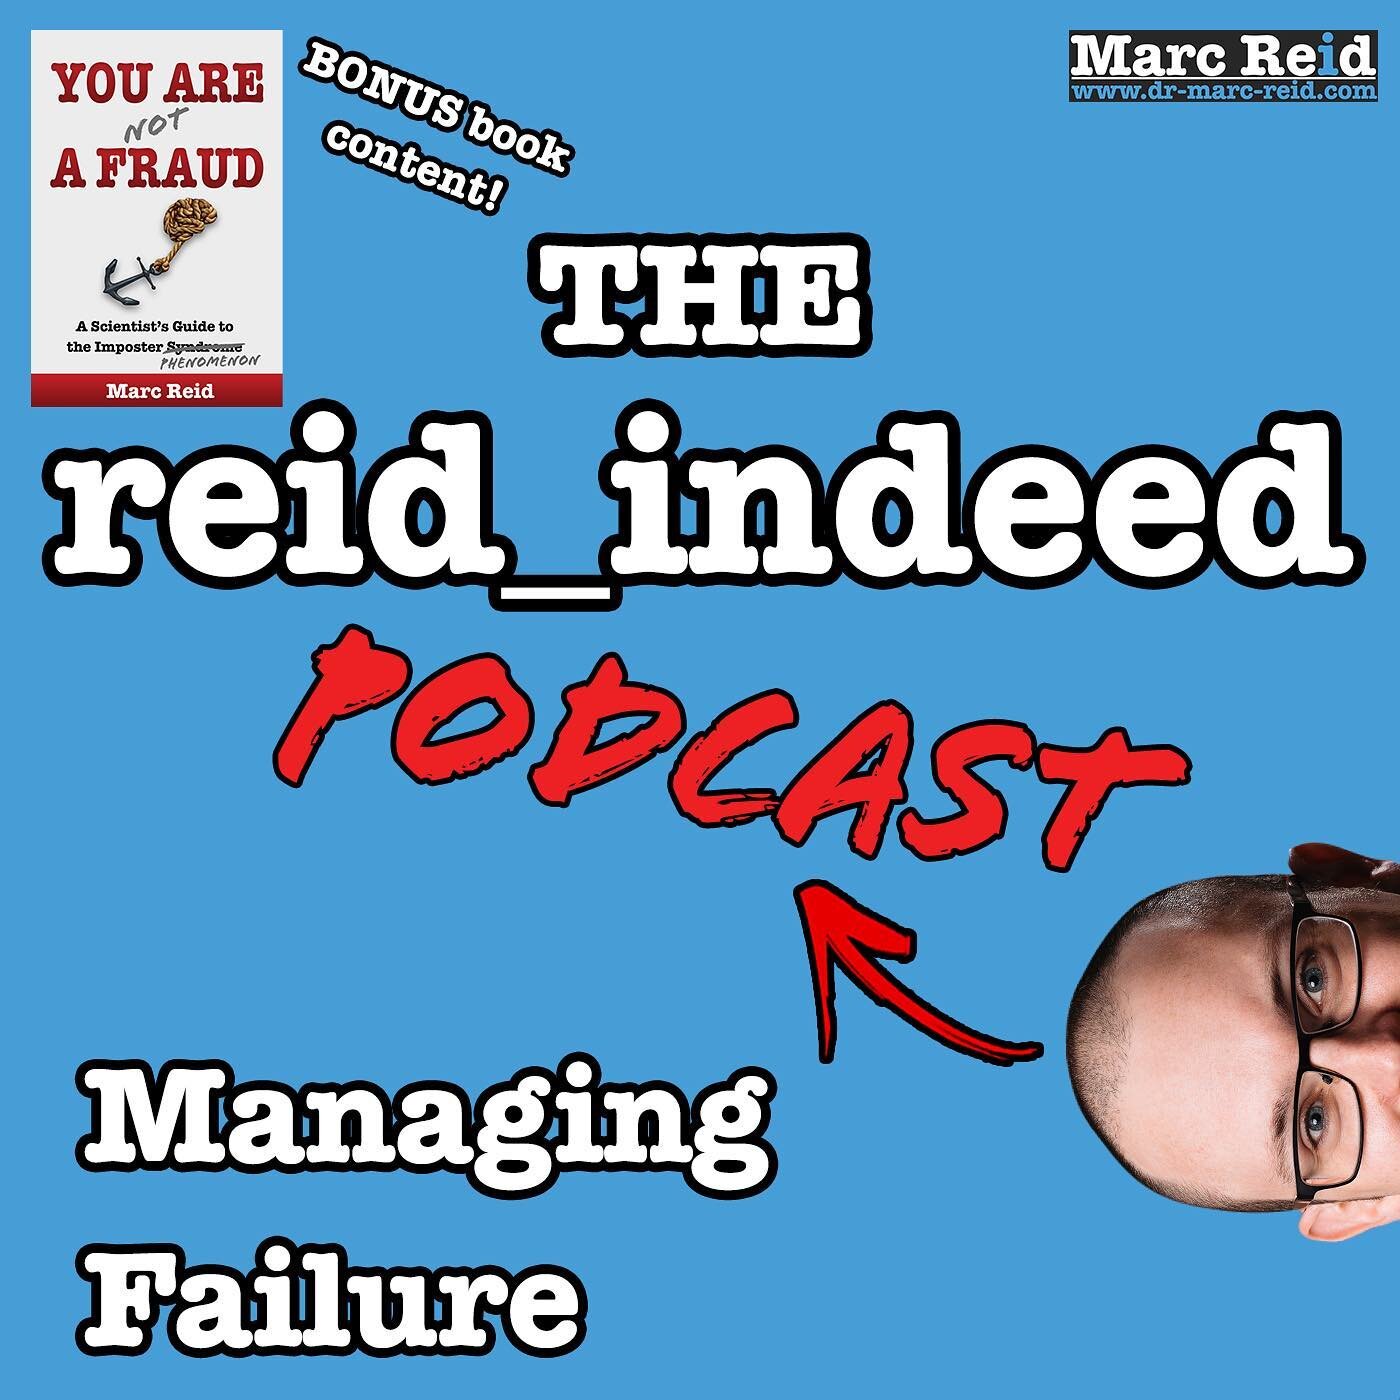 As part of the #YouAreNotAFraud launch, here's a bonus episode of the podcast, sharing my full interview with @bronjab on managing failure:

dr-marc-reid.com/podcast/managing-failure

Also available wherever you listen to podcasts.

Dr Brazil and I d